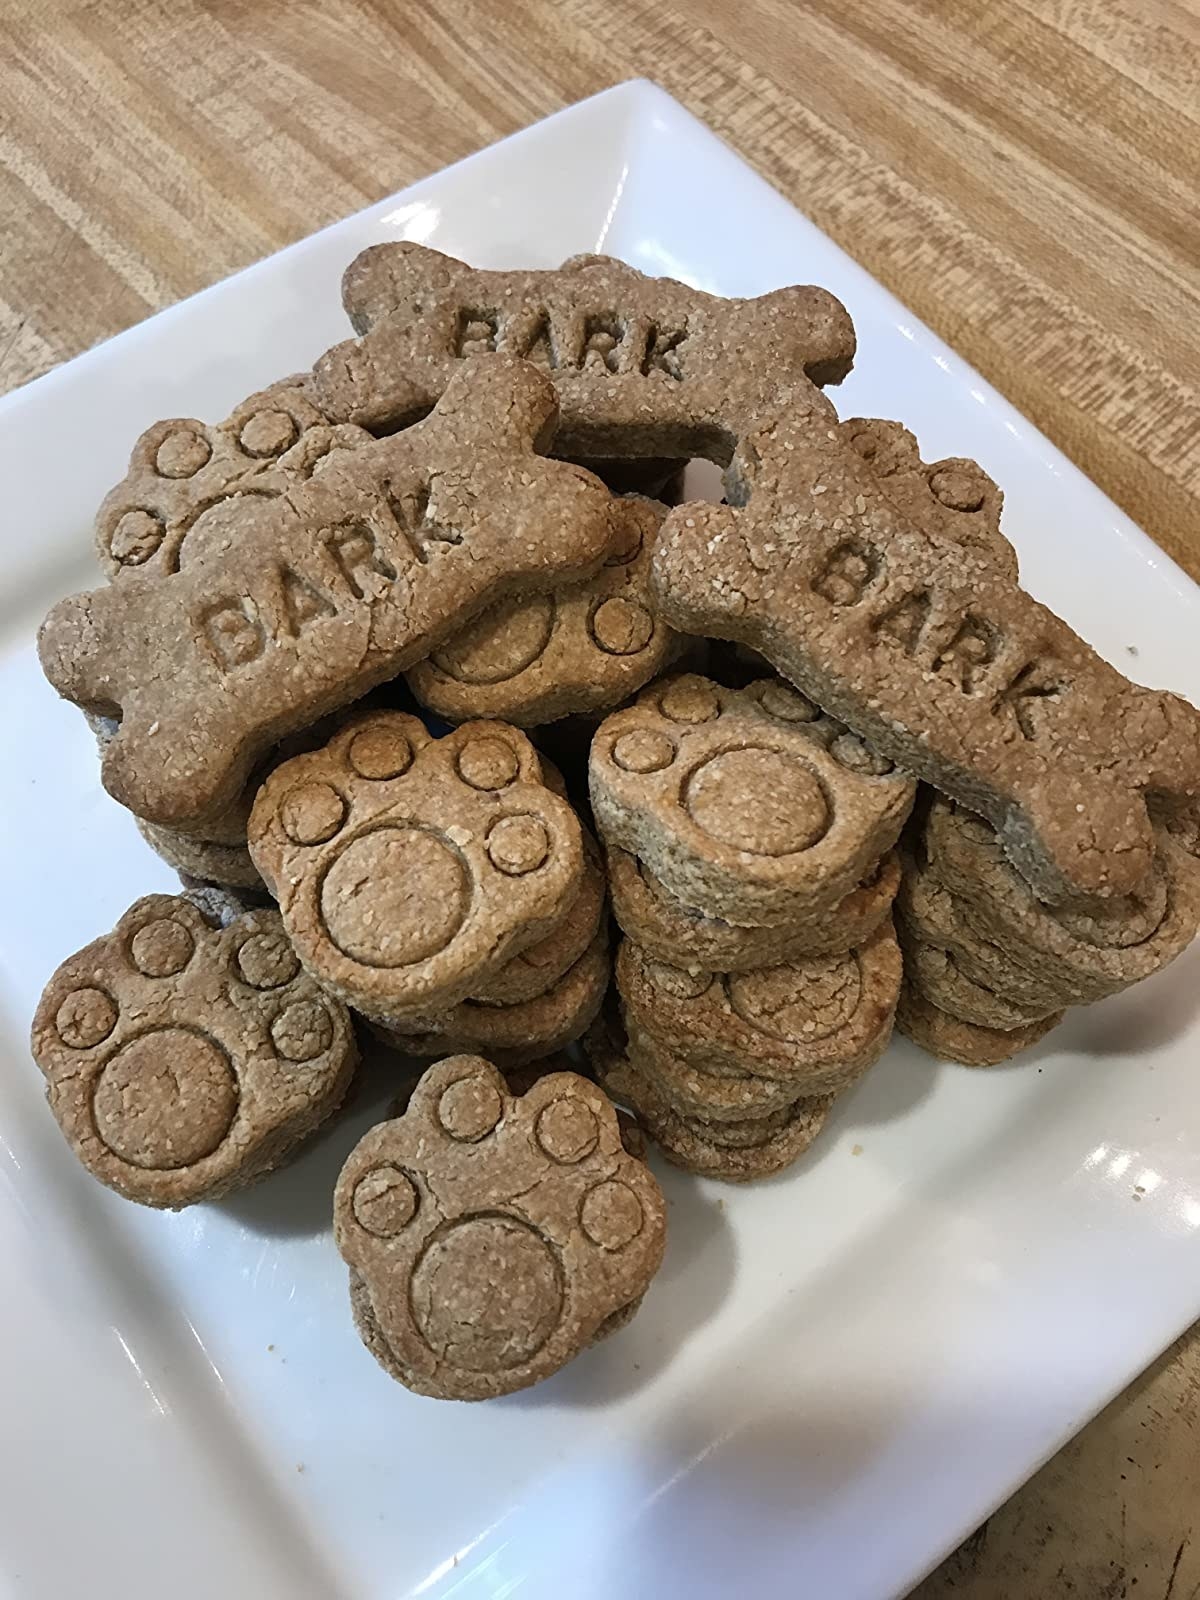 Reviewer image of dog cookies made with cookie cutters